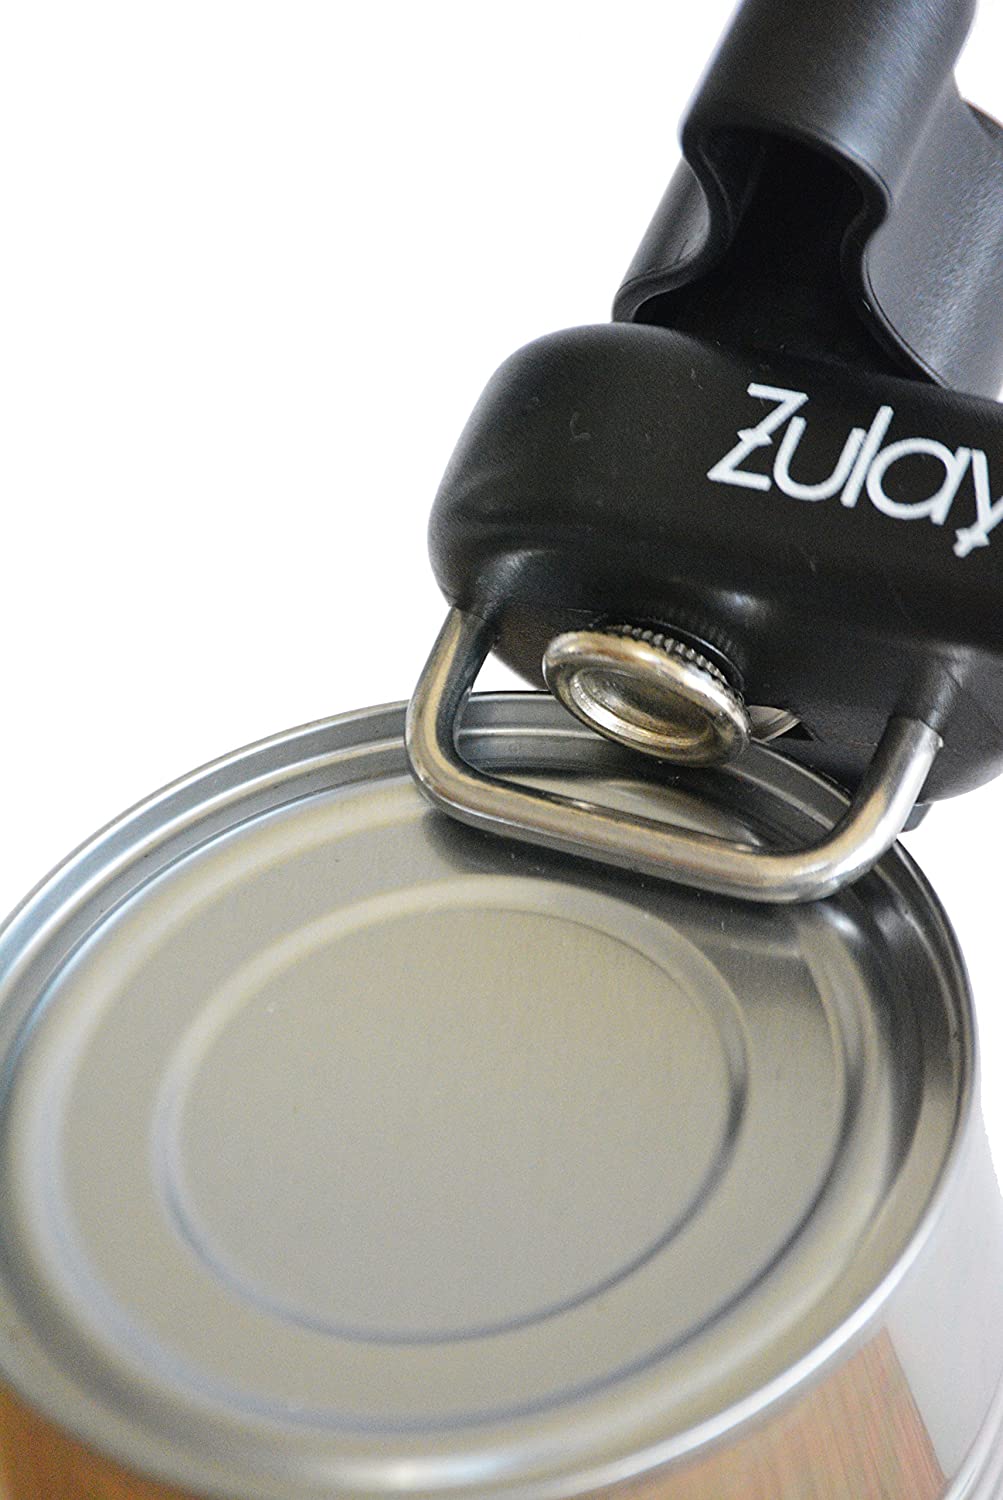 Zulay Kitchen Soft Edge Can Opener With Stainless Steel Blades and Large  Turn Knob, 1 - Ralphs